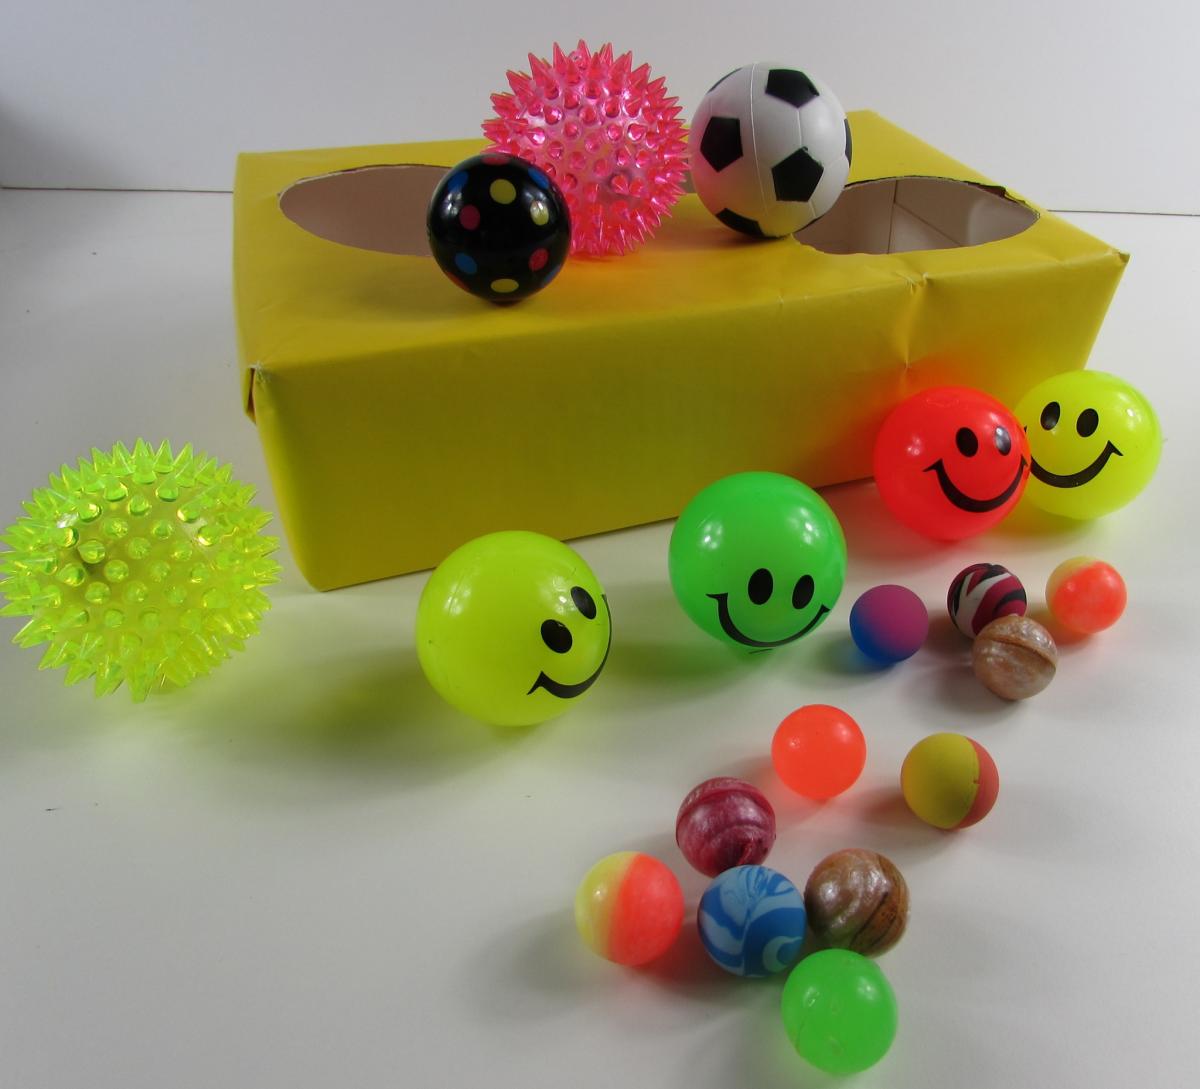 Homemade shape sorter from a cardboard box covered in yellow wrapping paper with three holes cut in the top of the box, Big, Medium and Little.  A selection of bright coloured balls are on and around the box 